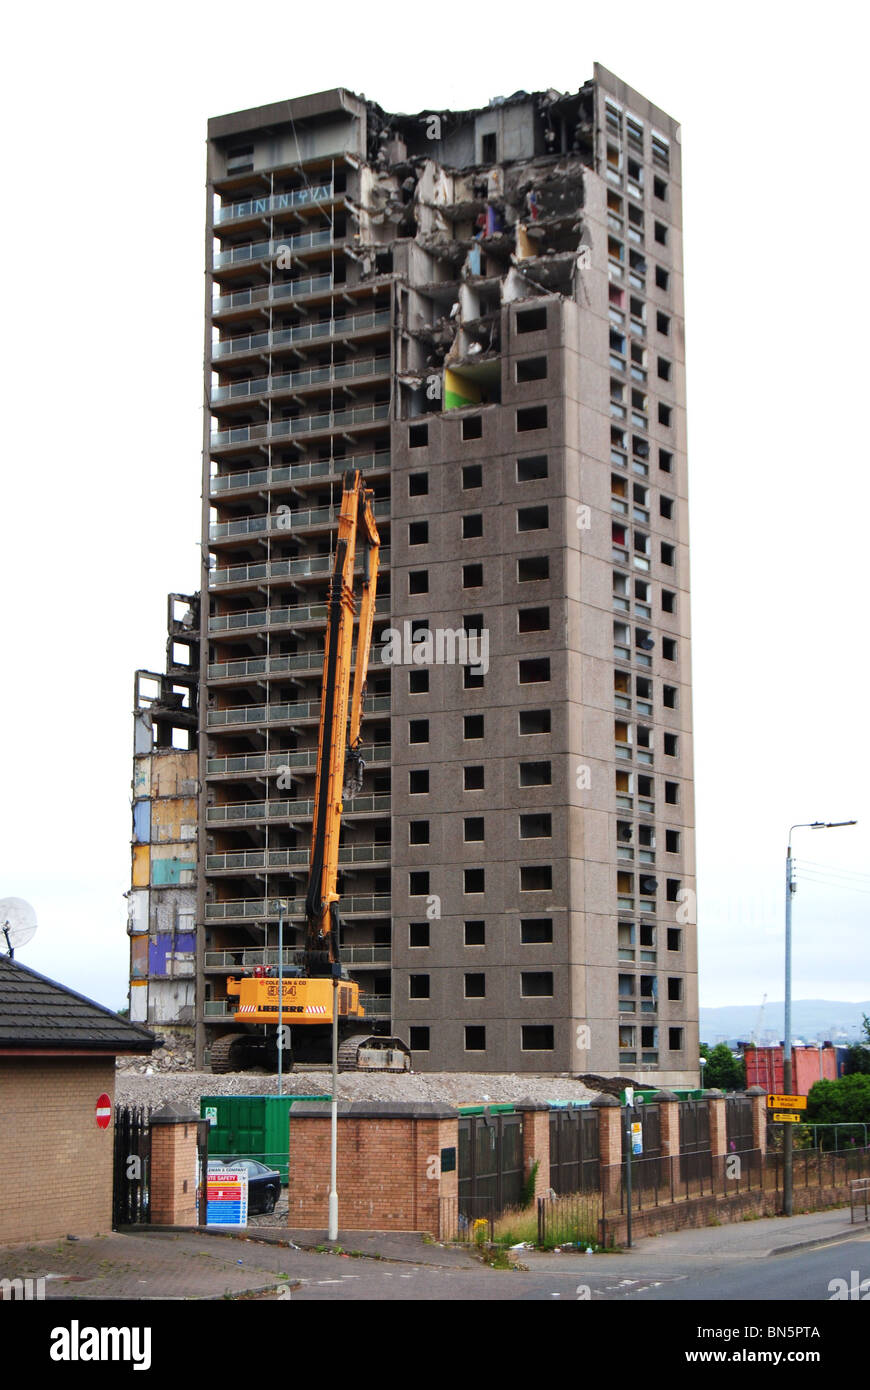 Demolition of high rise flats - Broomloan Court, Ibrox, Glasgow. Stock Photo